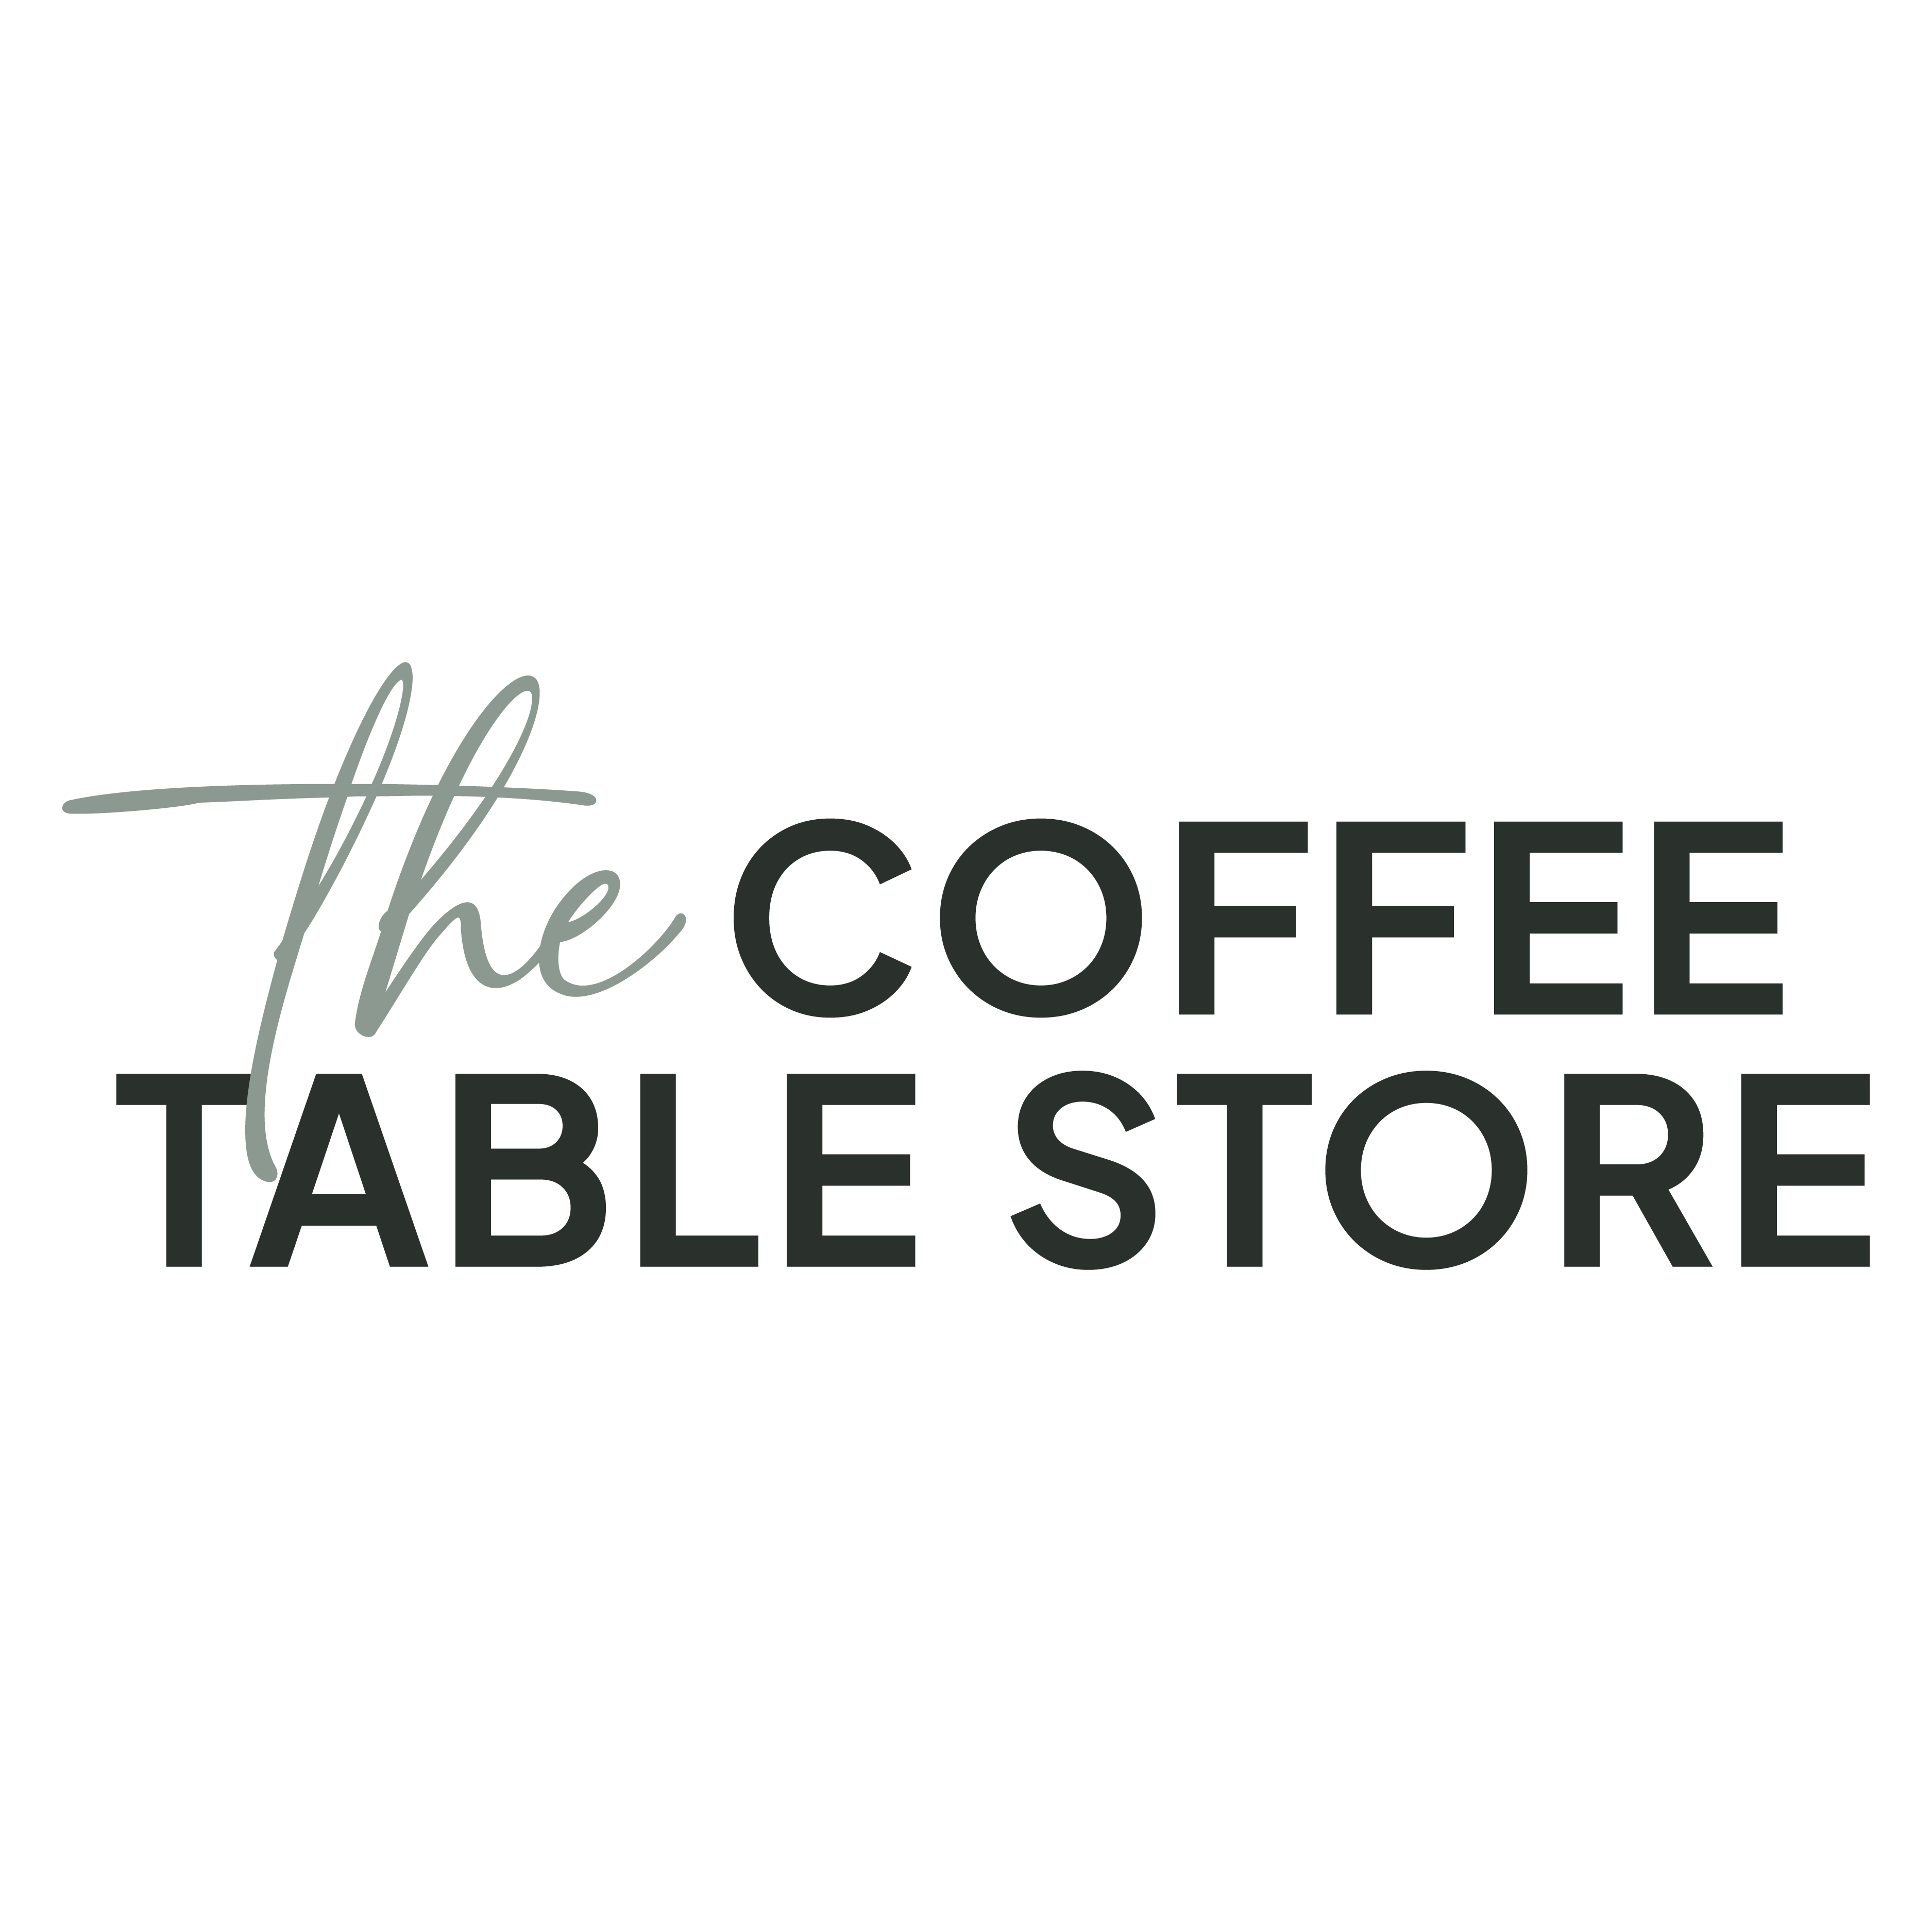 The+Coffee+Table+Store+Alt+Logo logo design by logo designer ESM+Creative+Studio+ for your inspiration and for the worlds largest logo competition